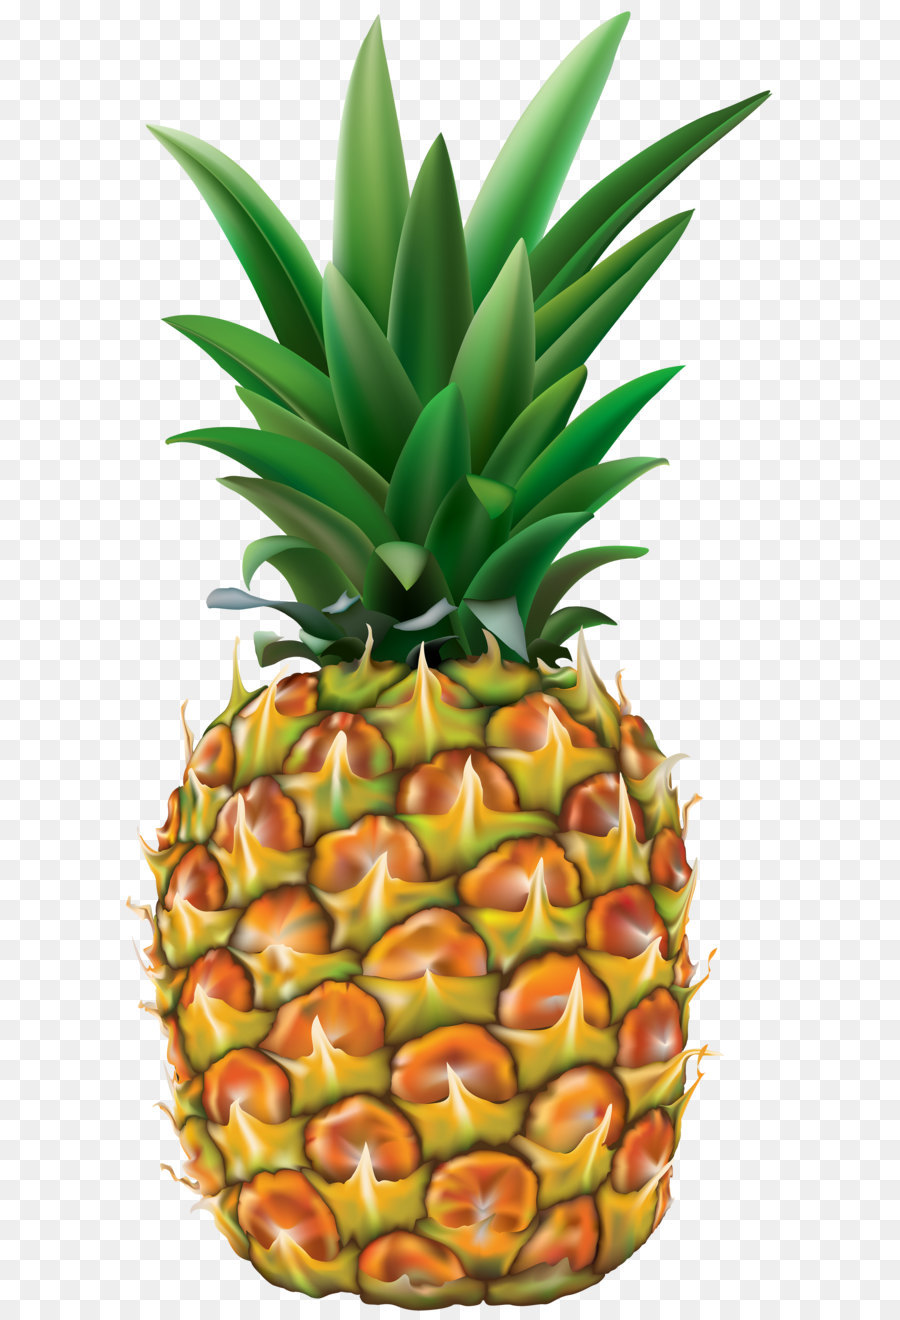 iPhone 6 Plus iPhone 8 iPhone X Juice iPhone 5s - Pineapple Transparent PNG Clip Art Image png download - 2472*5000 - Free Transparent Orange Juice png Download.